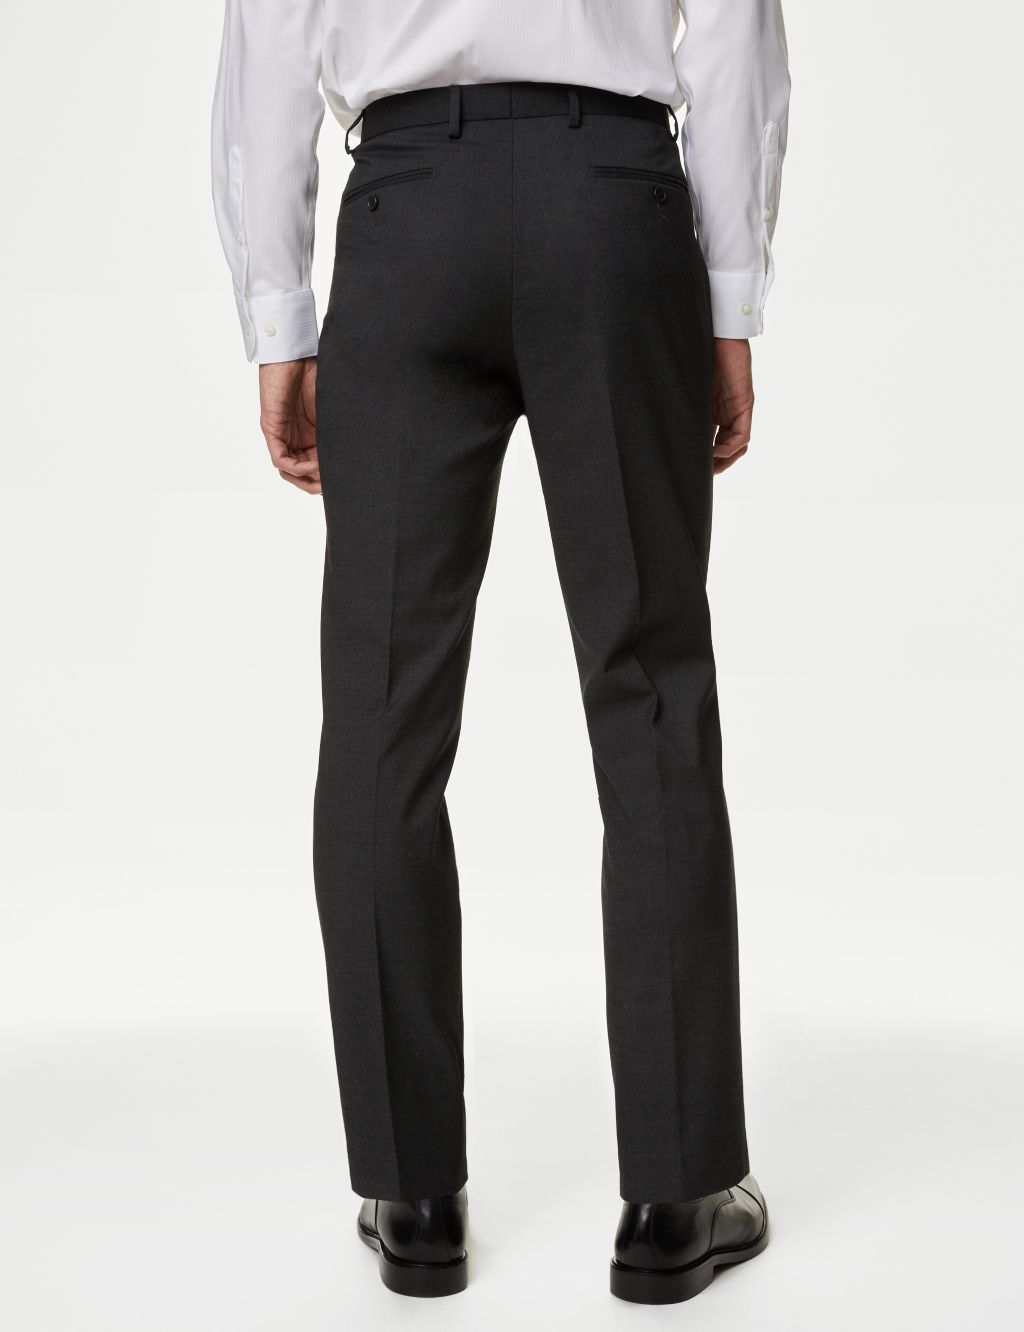 Slim Fit Stretch Suit Trousers image 4